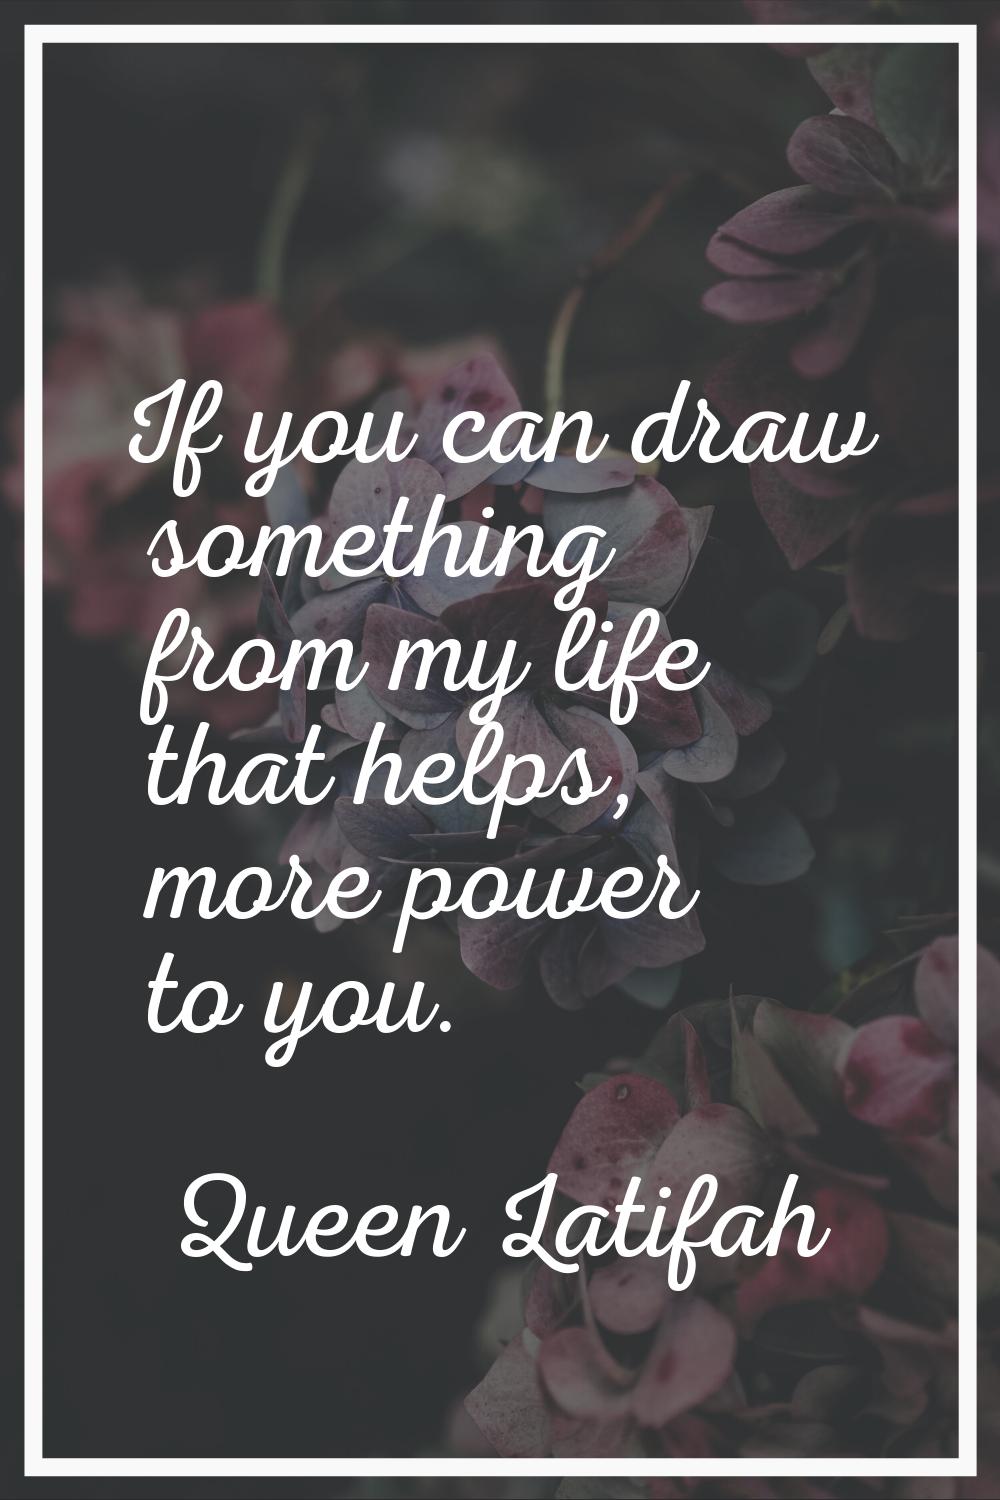 If you can draw something from my life that helps, more power to you.